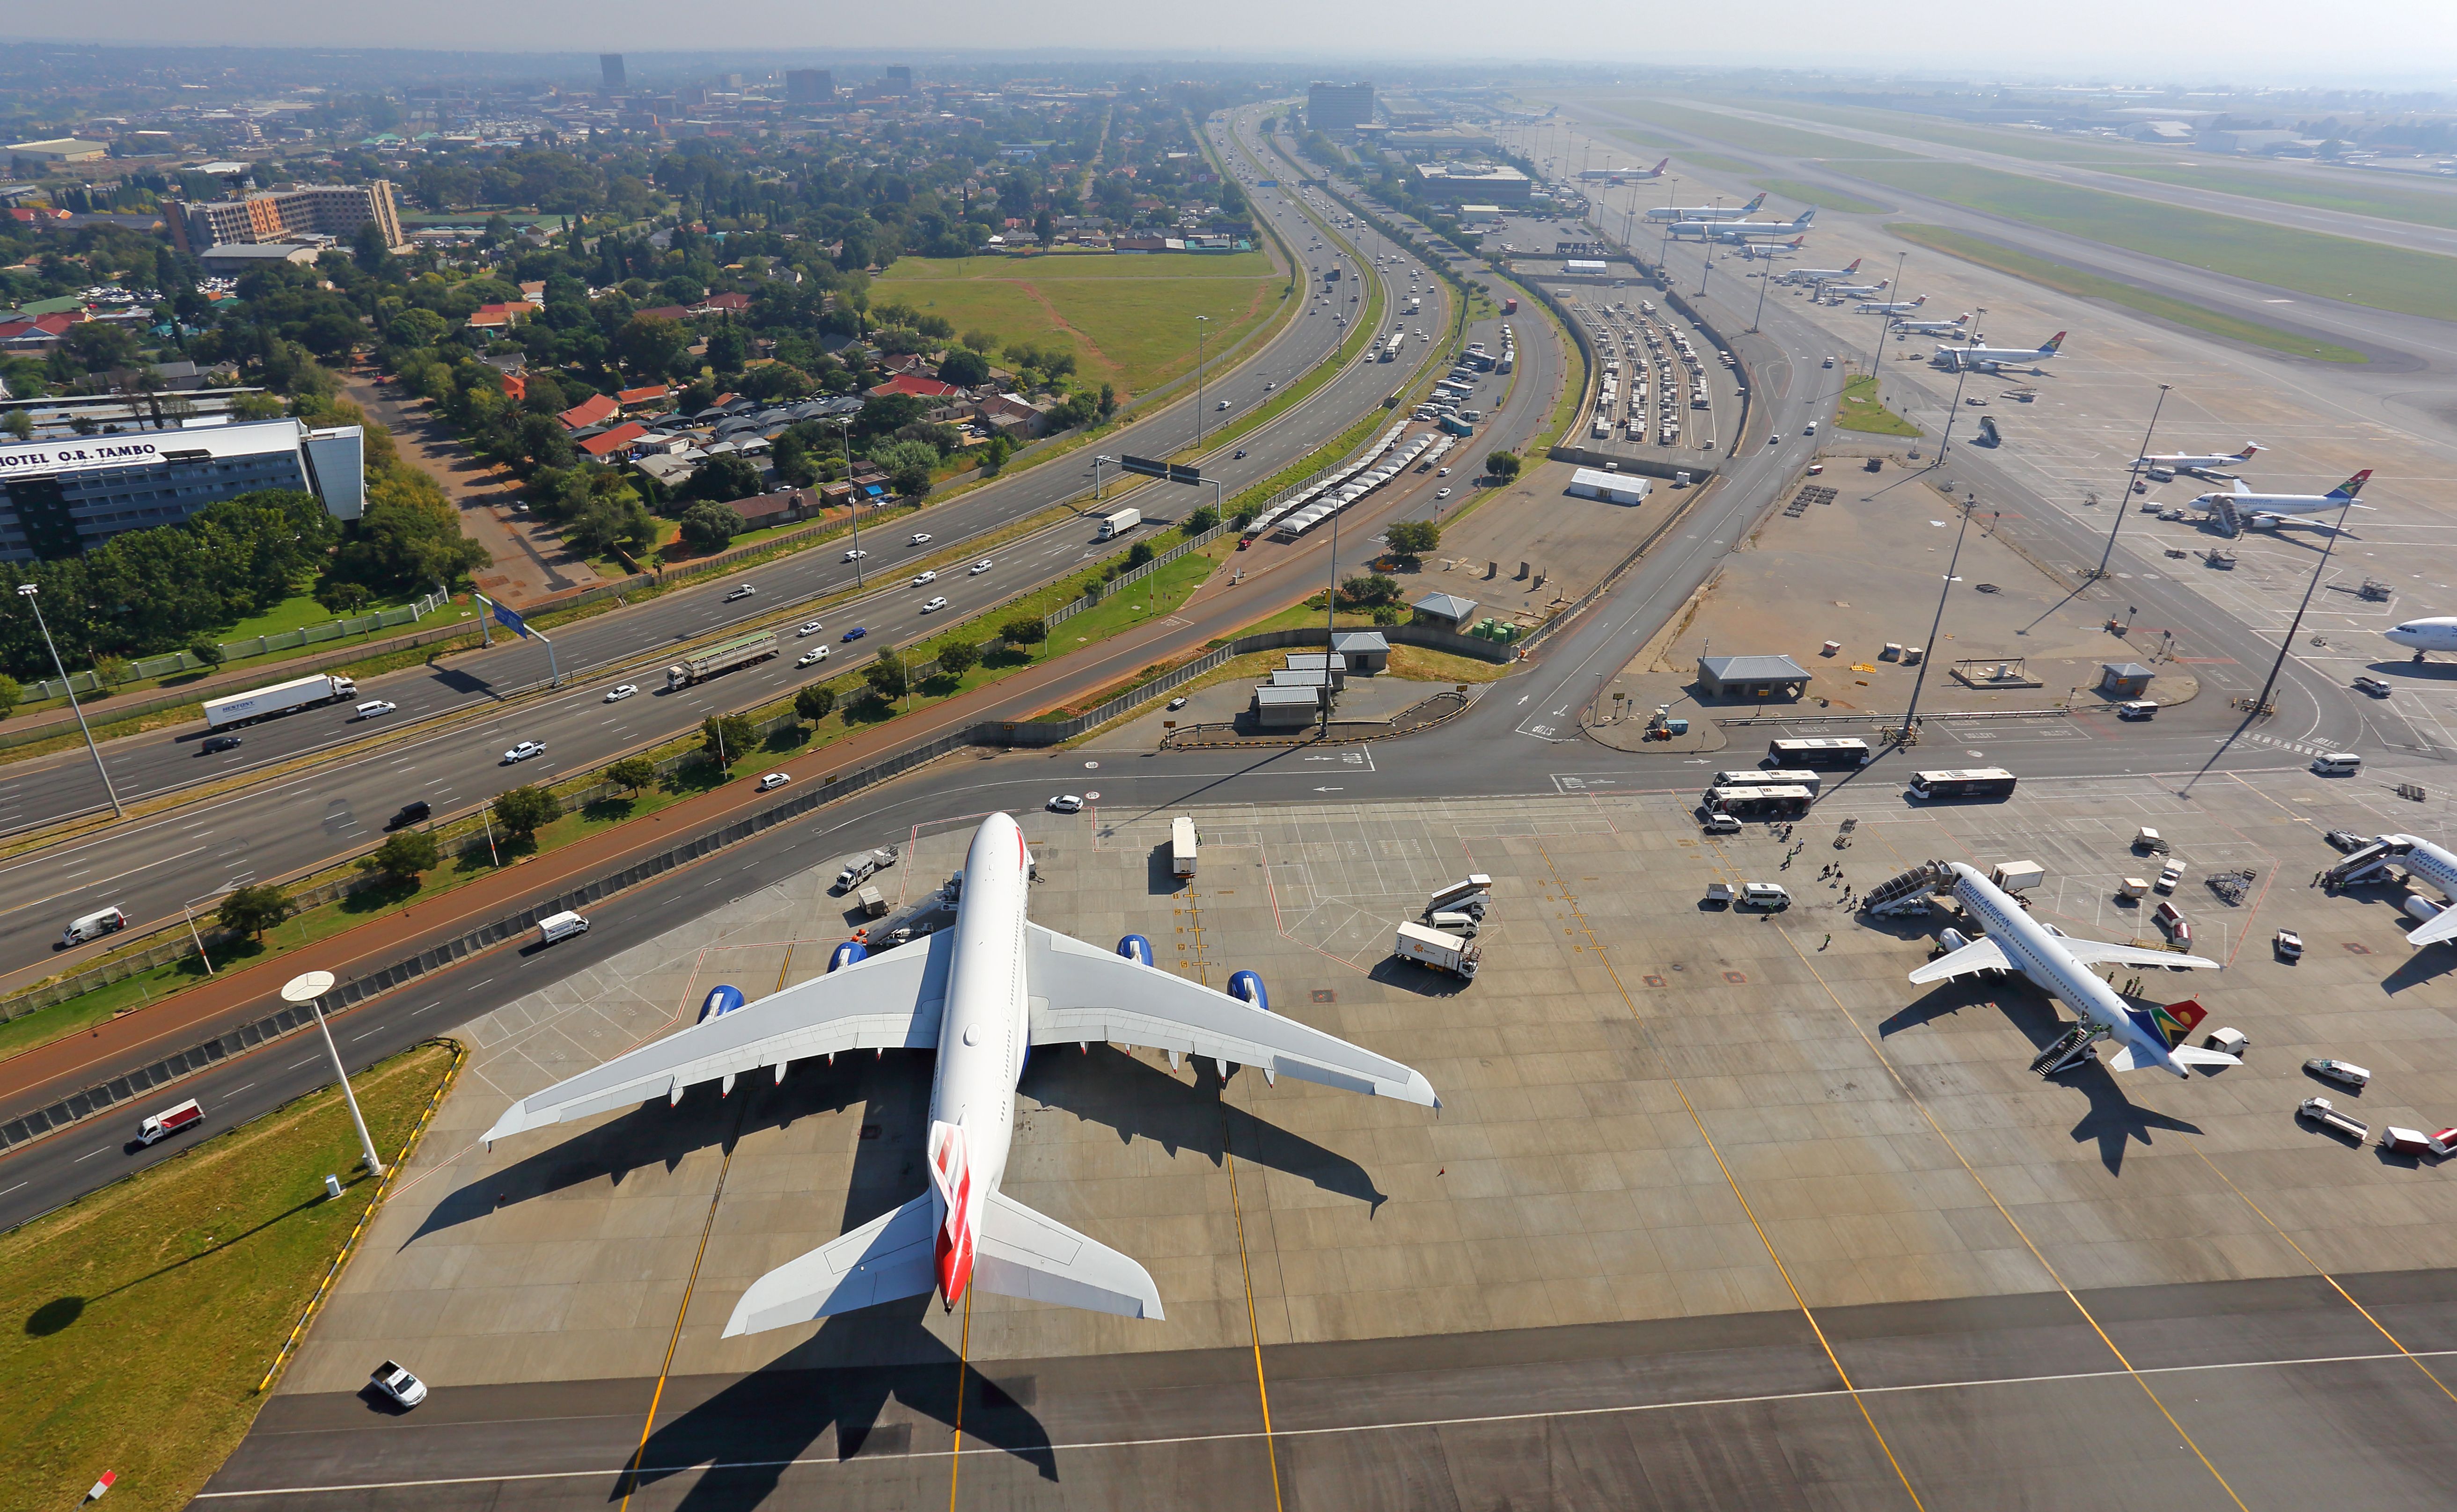 An Aerial view of a British Airways Airbus A380 on the apron at OR Tambo Airport.